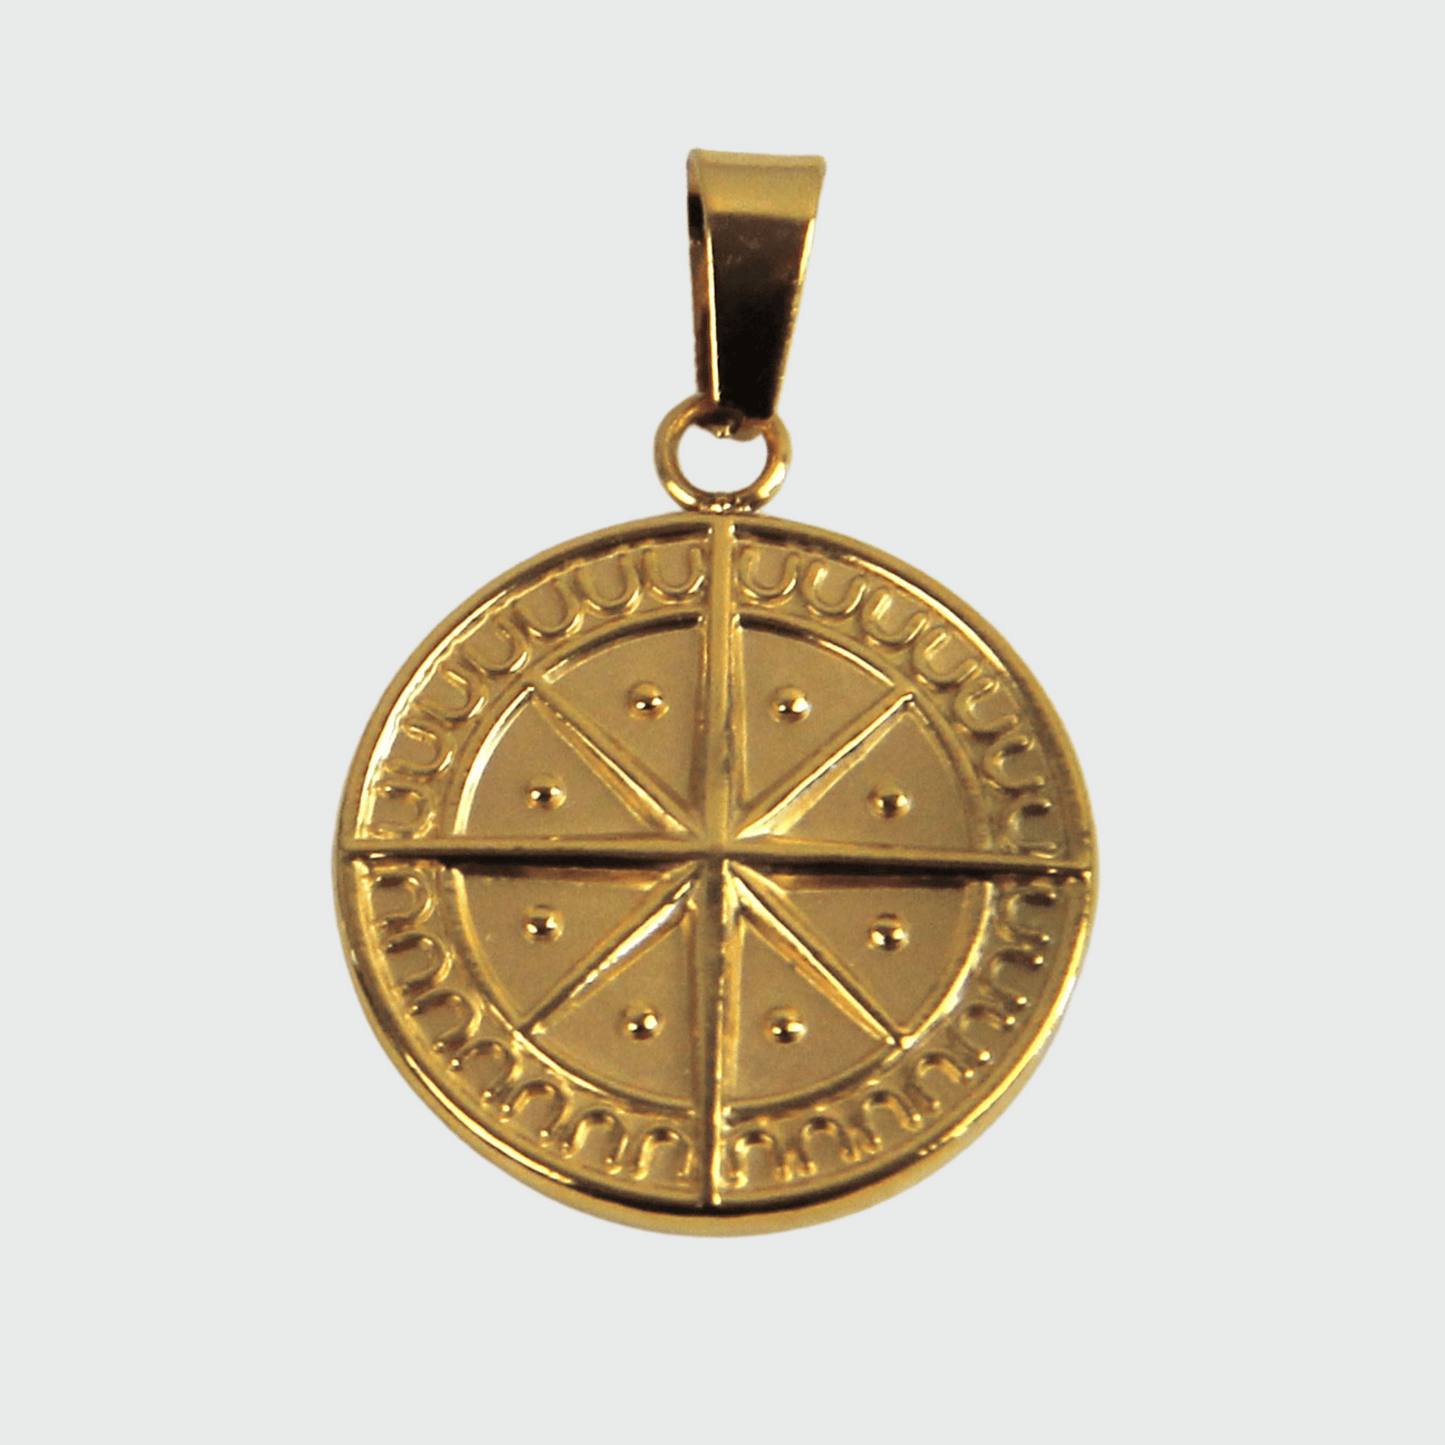 Silver or Gold Stainless Steel Compass Pendant - Boutique Wear RENN